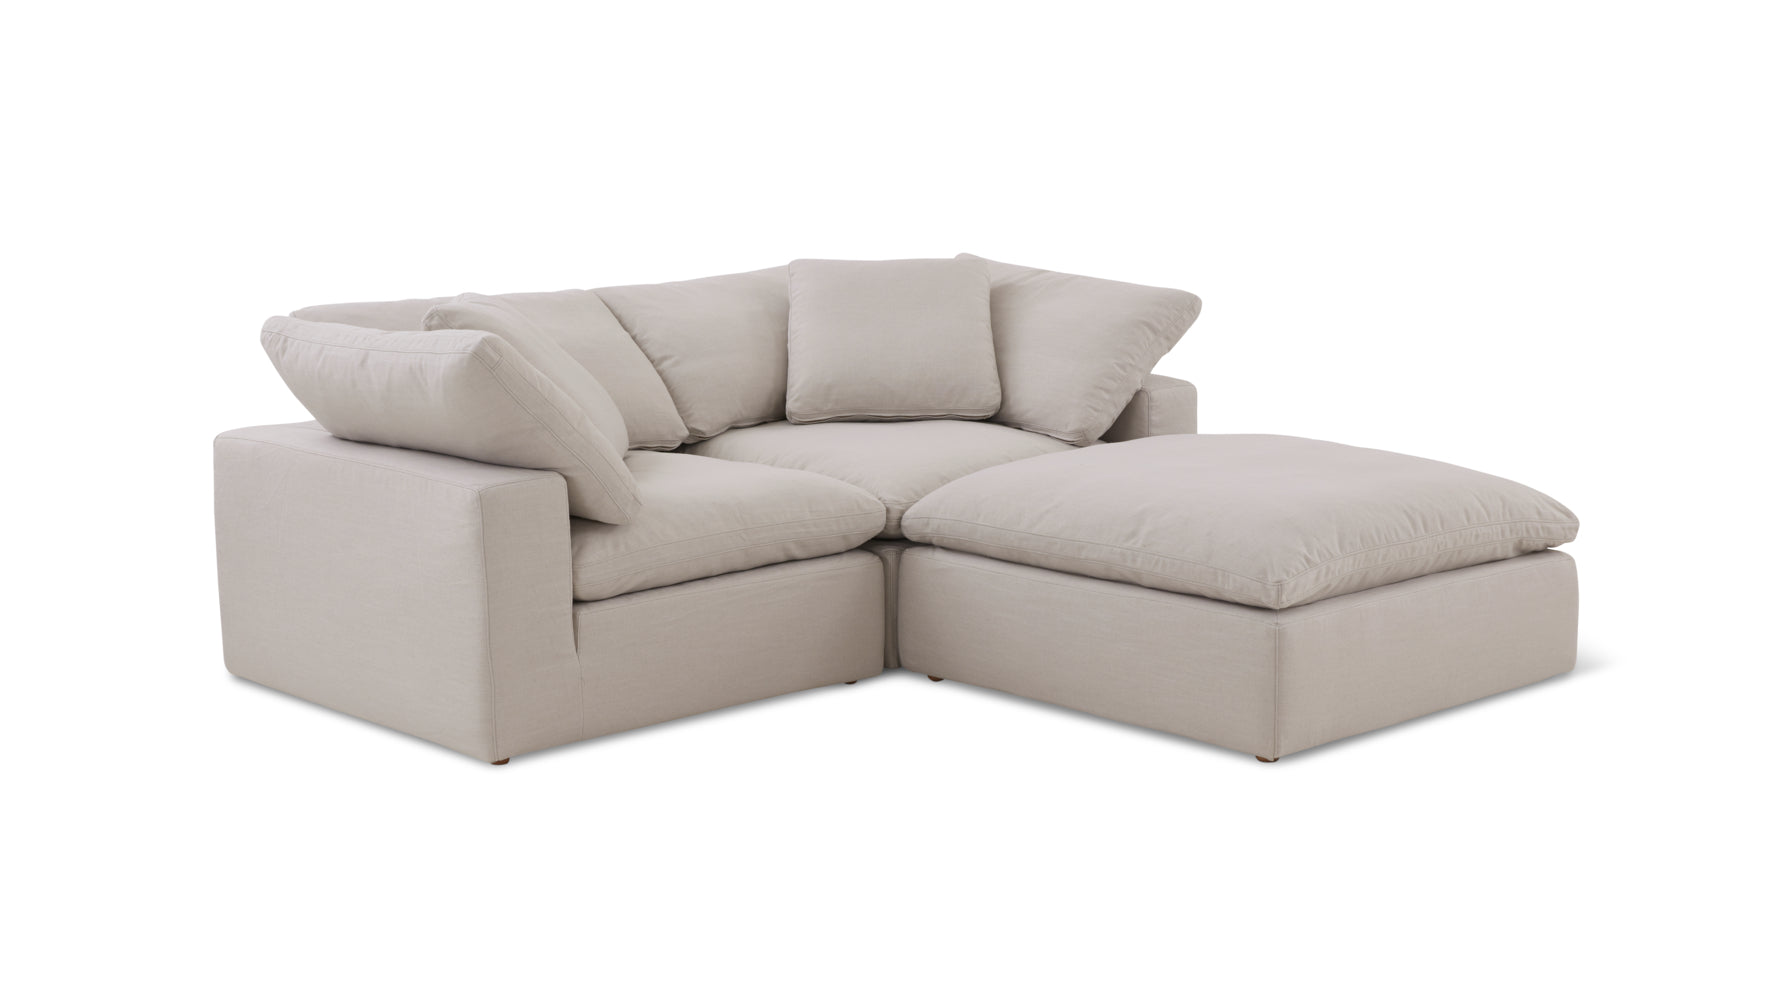 Movie Night™ 3-Piece Modular Sectional, Large, Clay - Image 7